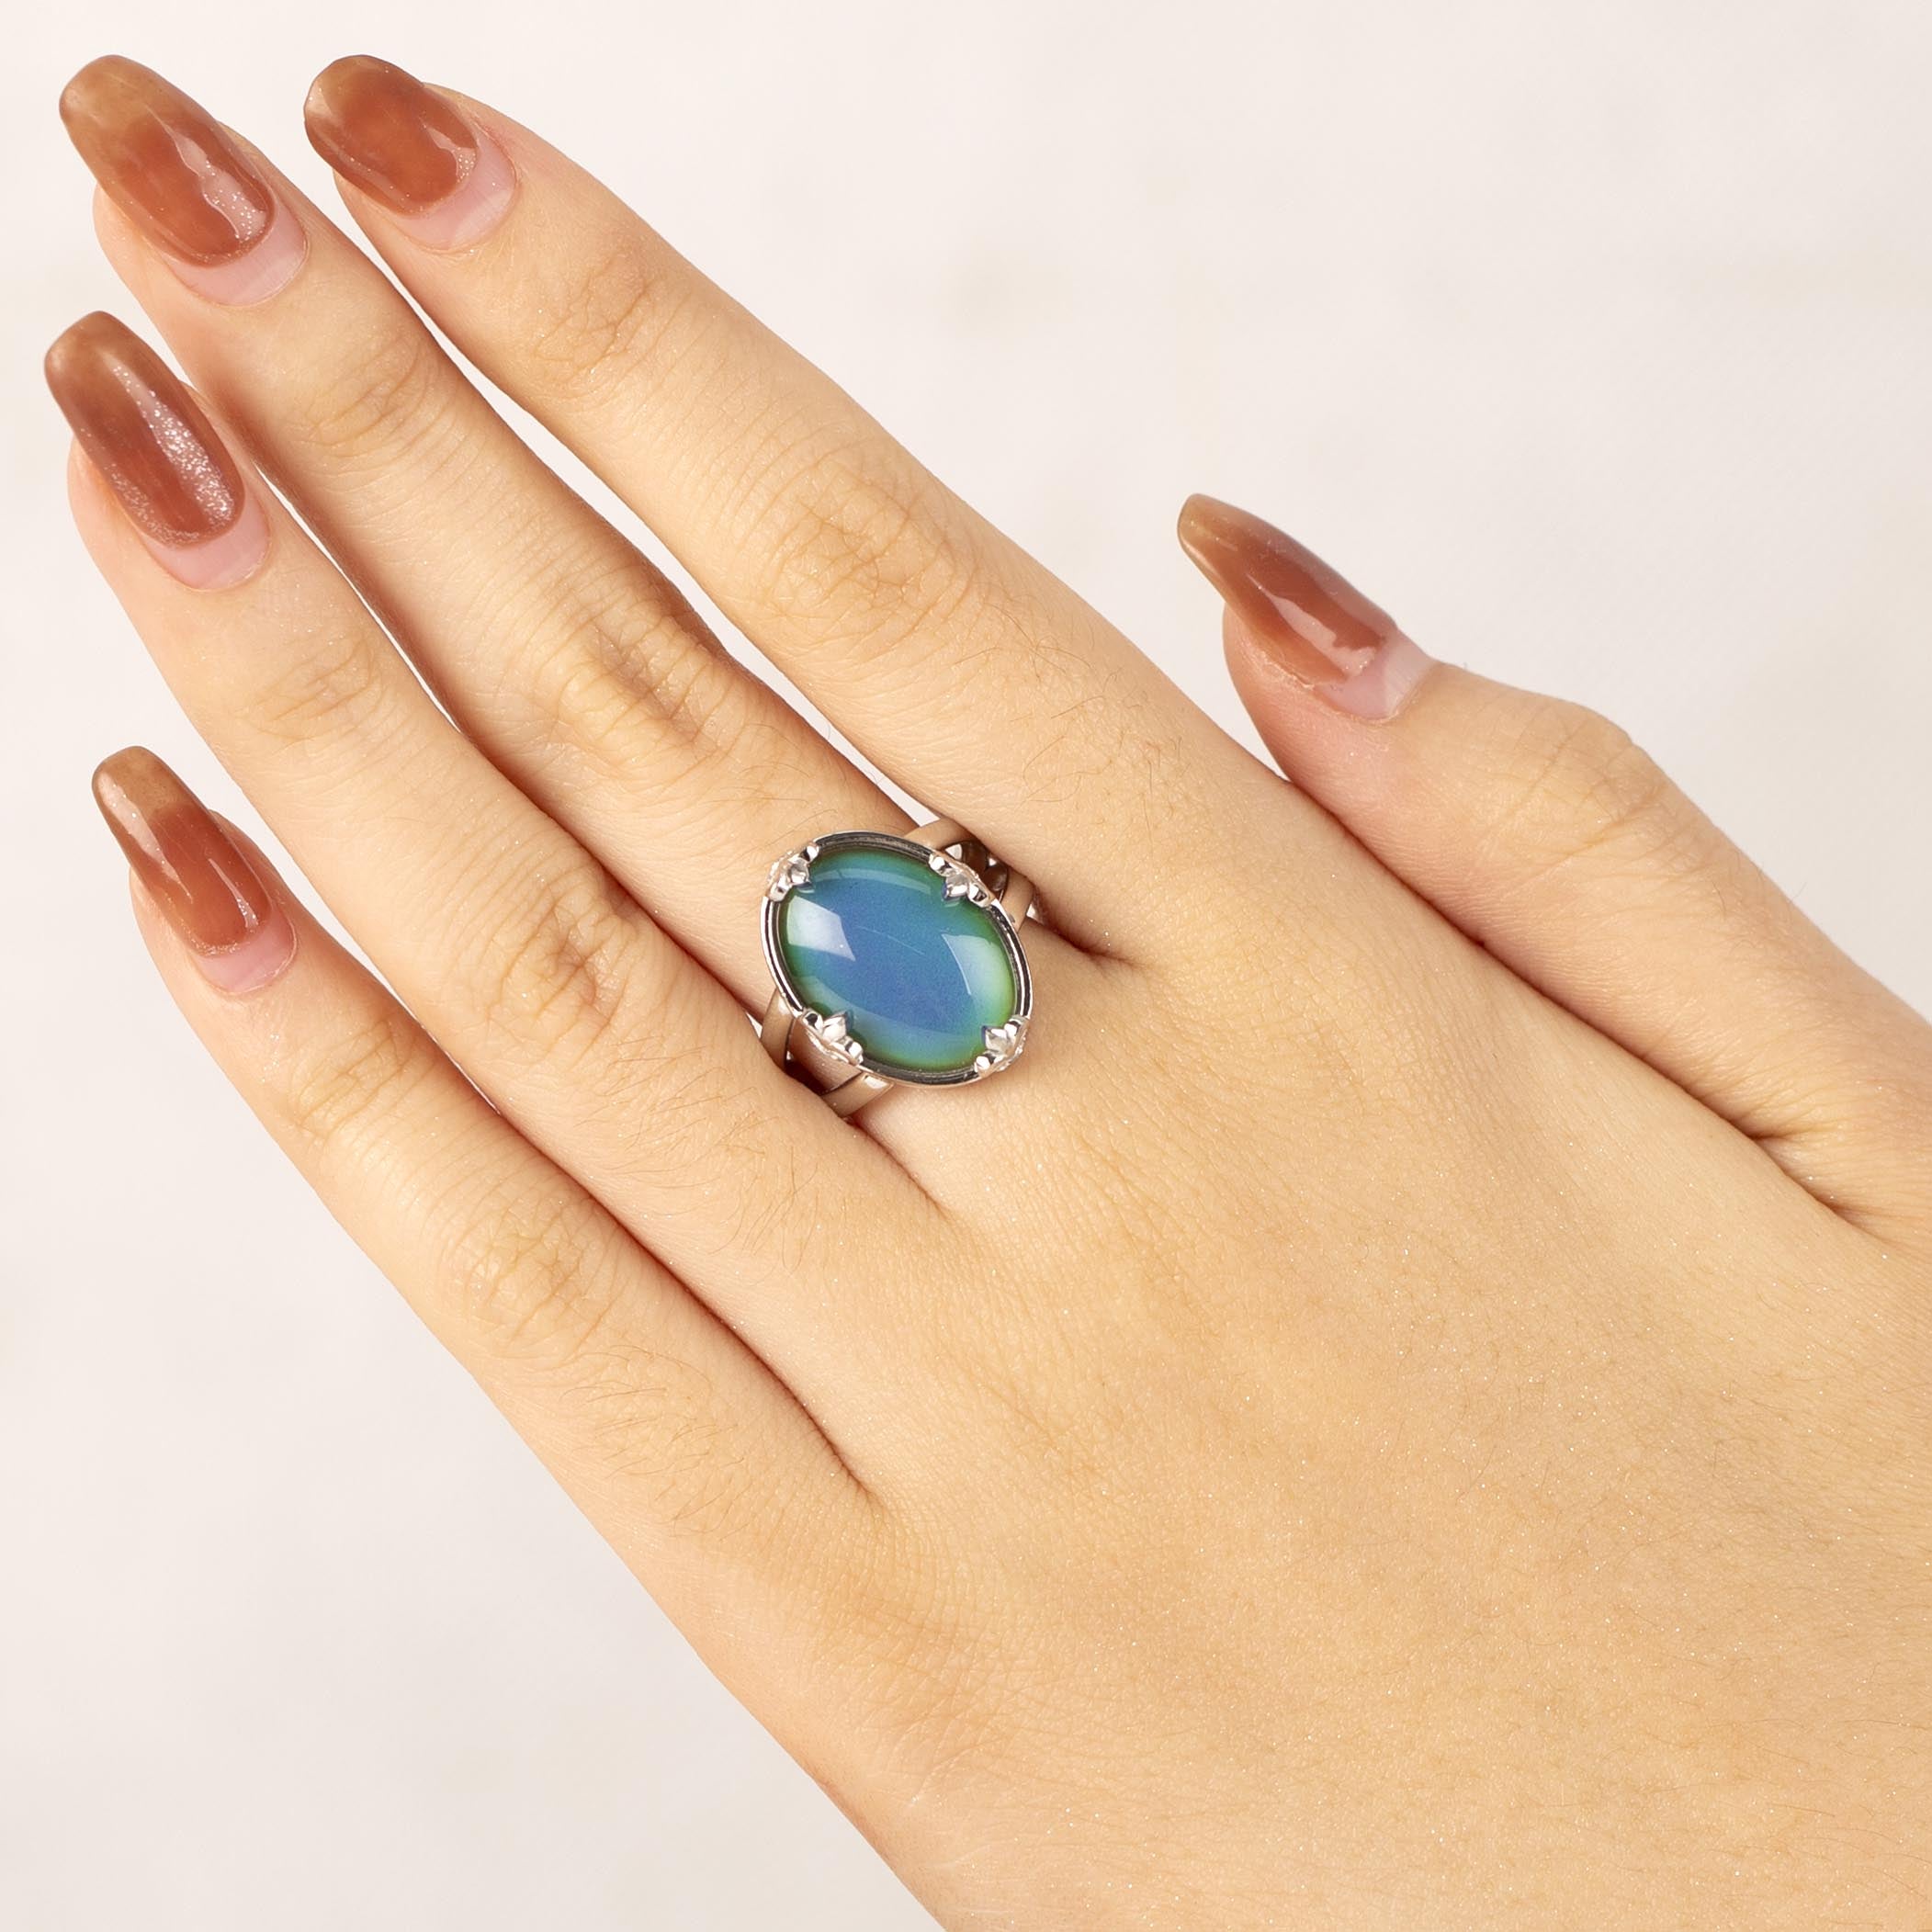 Fashion Cocktail Color Changing Mood Ring In Sterling Silver - aurorapromise